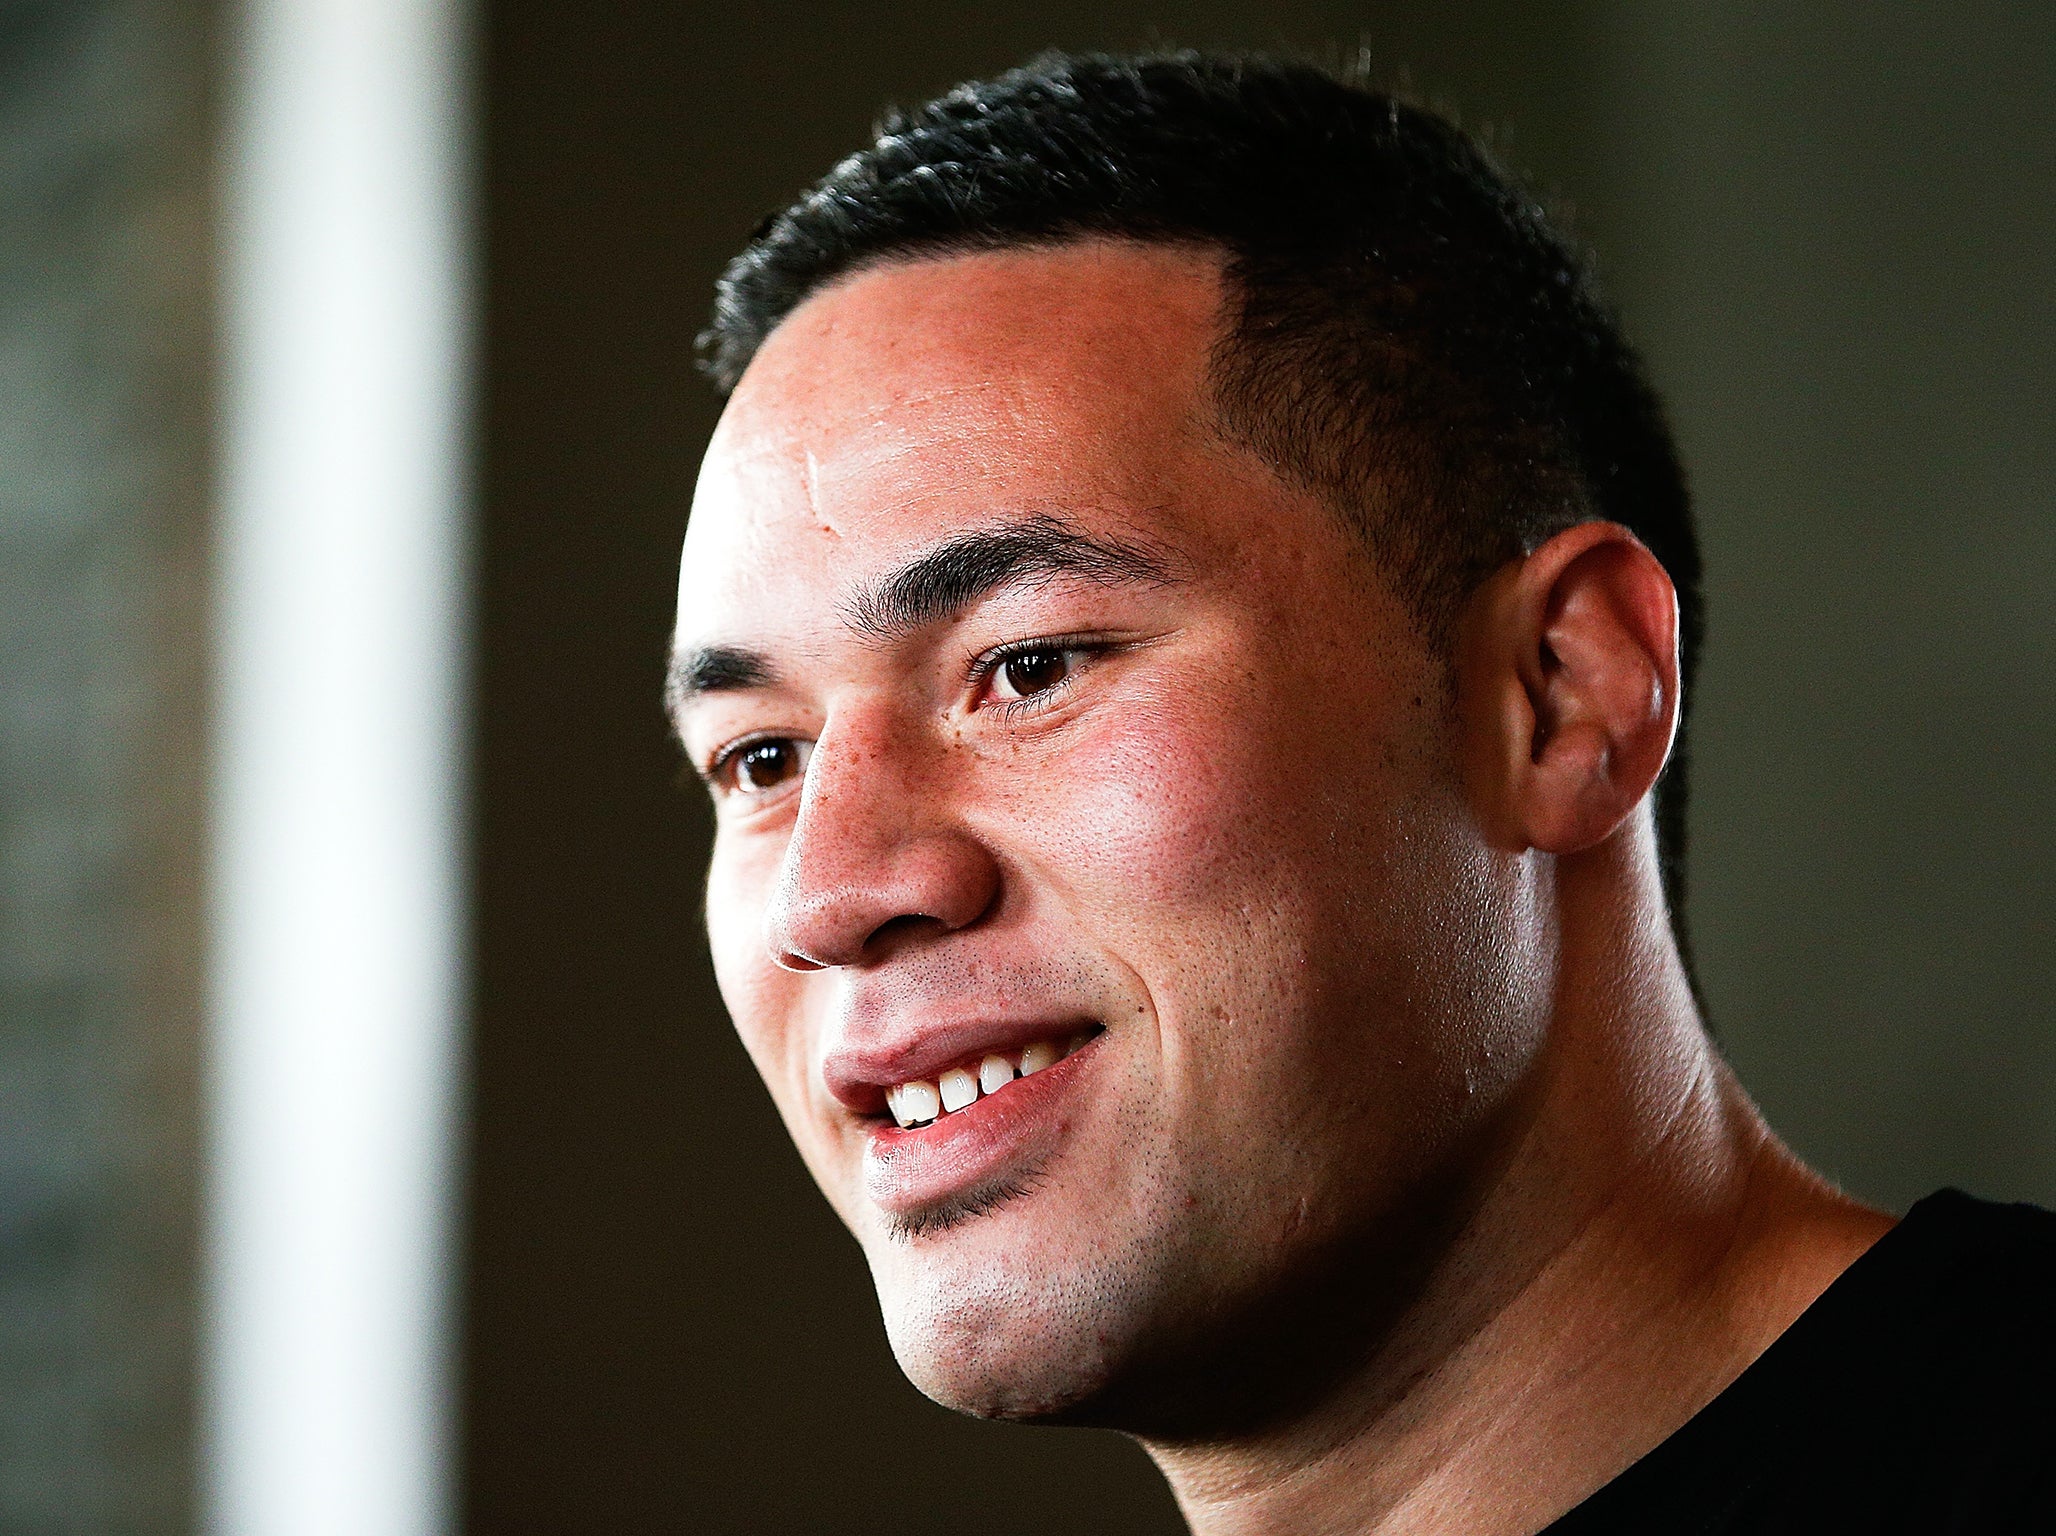 Joseph Parker in 2013, ahead of his sixth professional fight